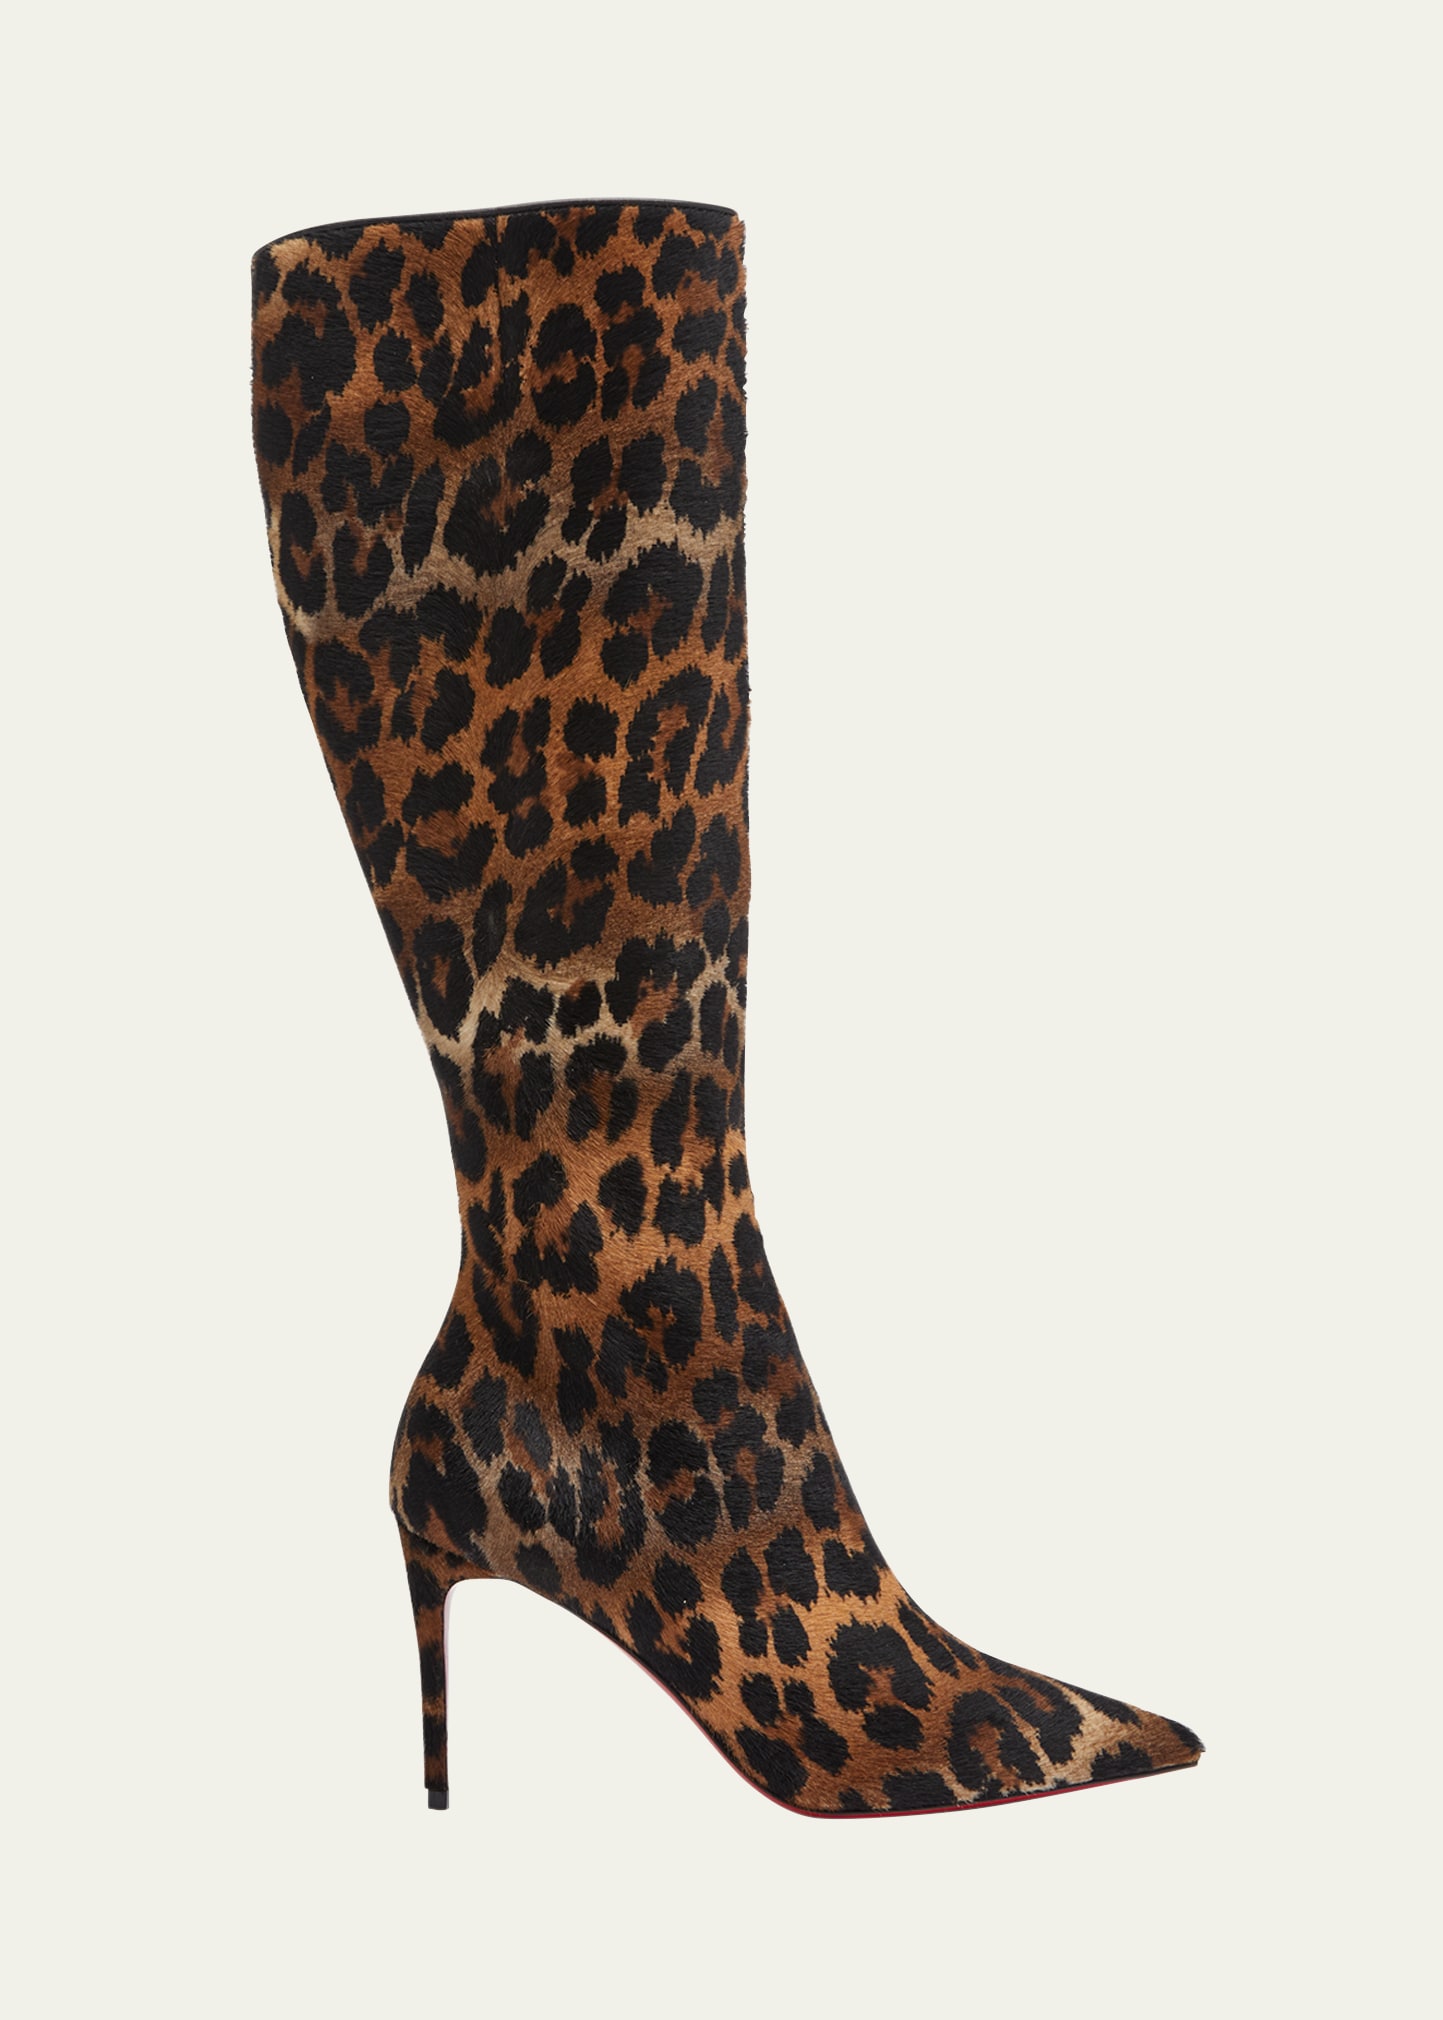 Kate Red Sole Leopard Stiletto Boots